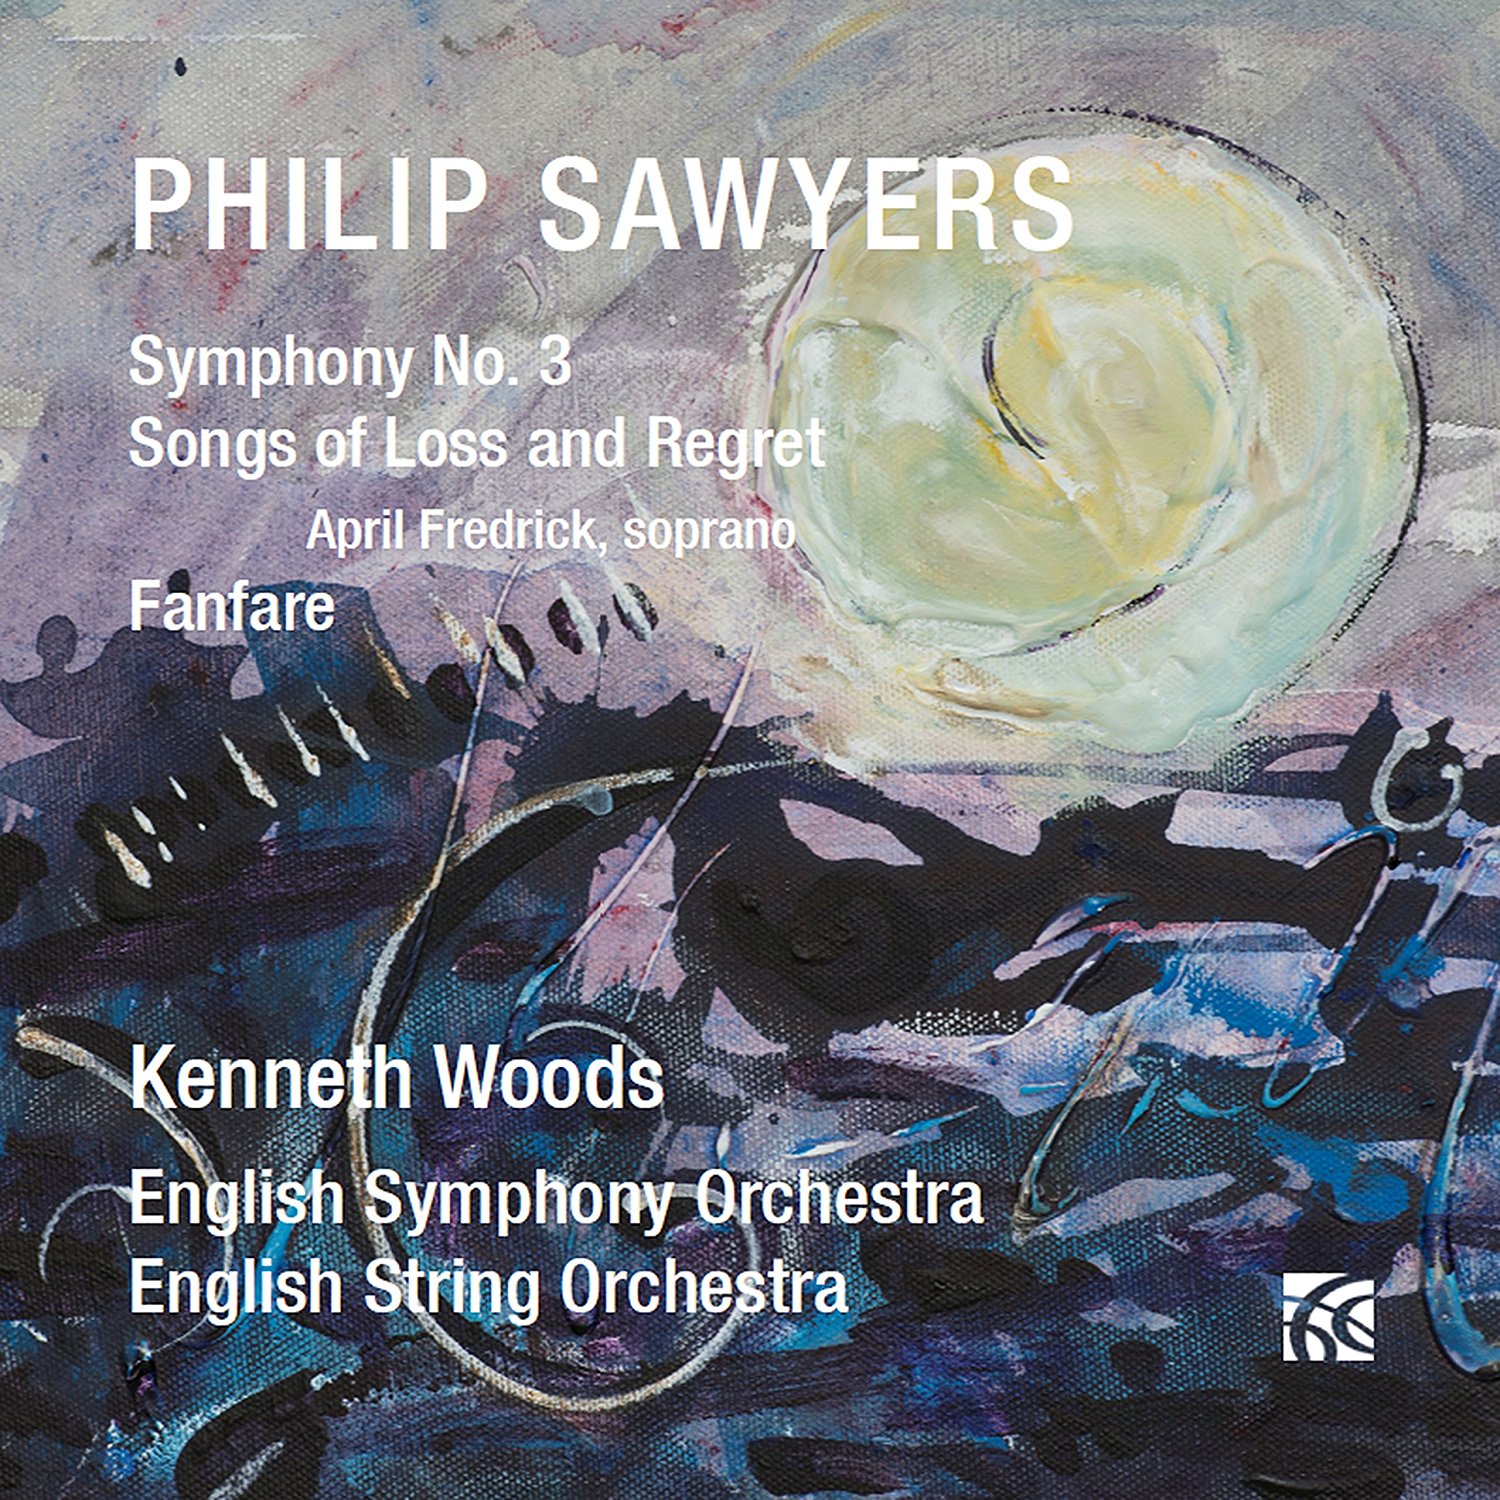 American Record Guide On Sawyers’ Symphony no. 3